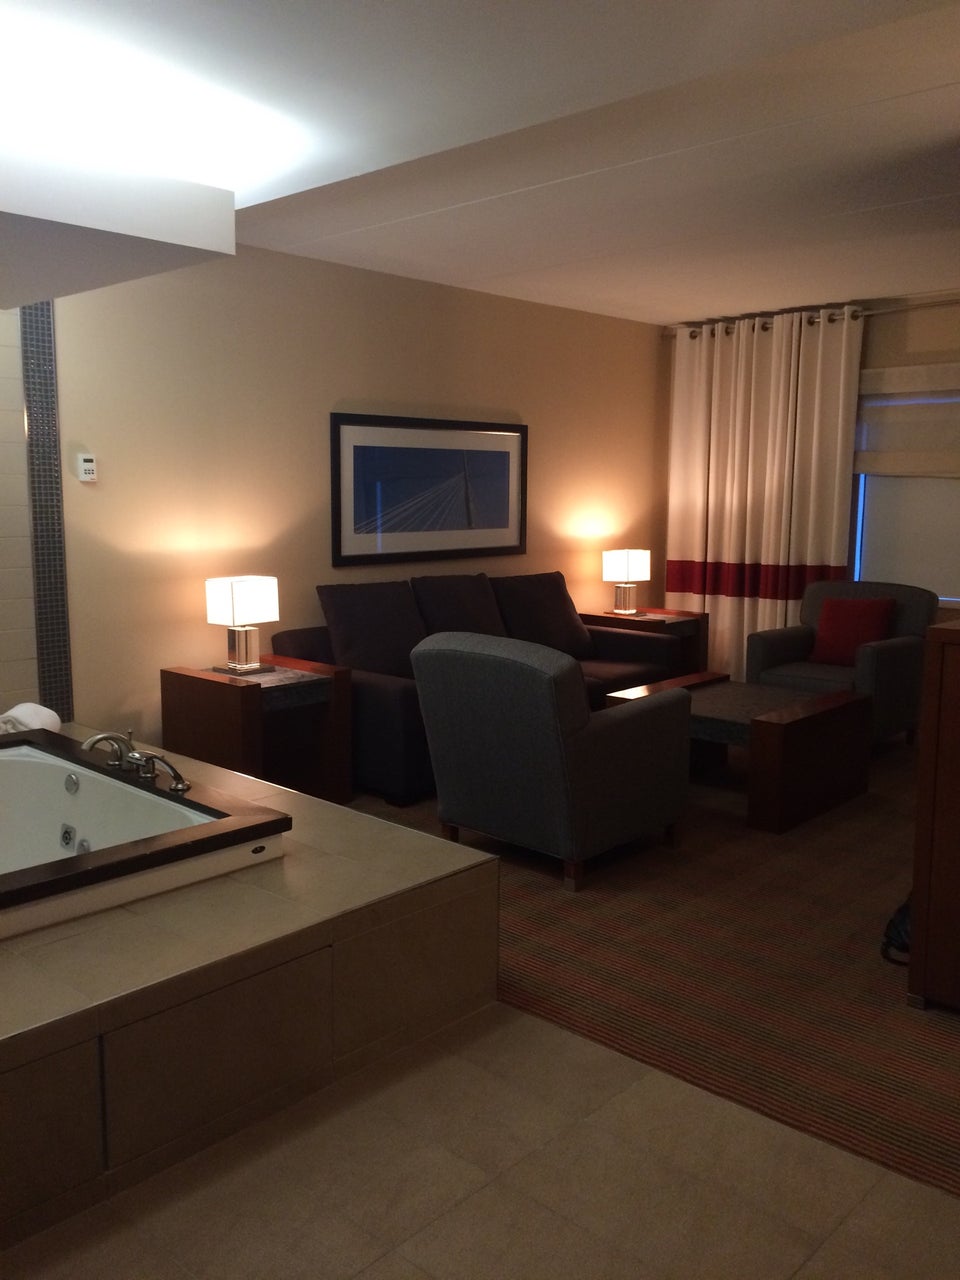 Photo of Four Points by Sheraton Winnipeg South